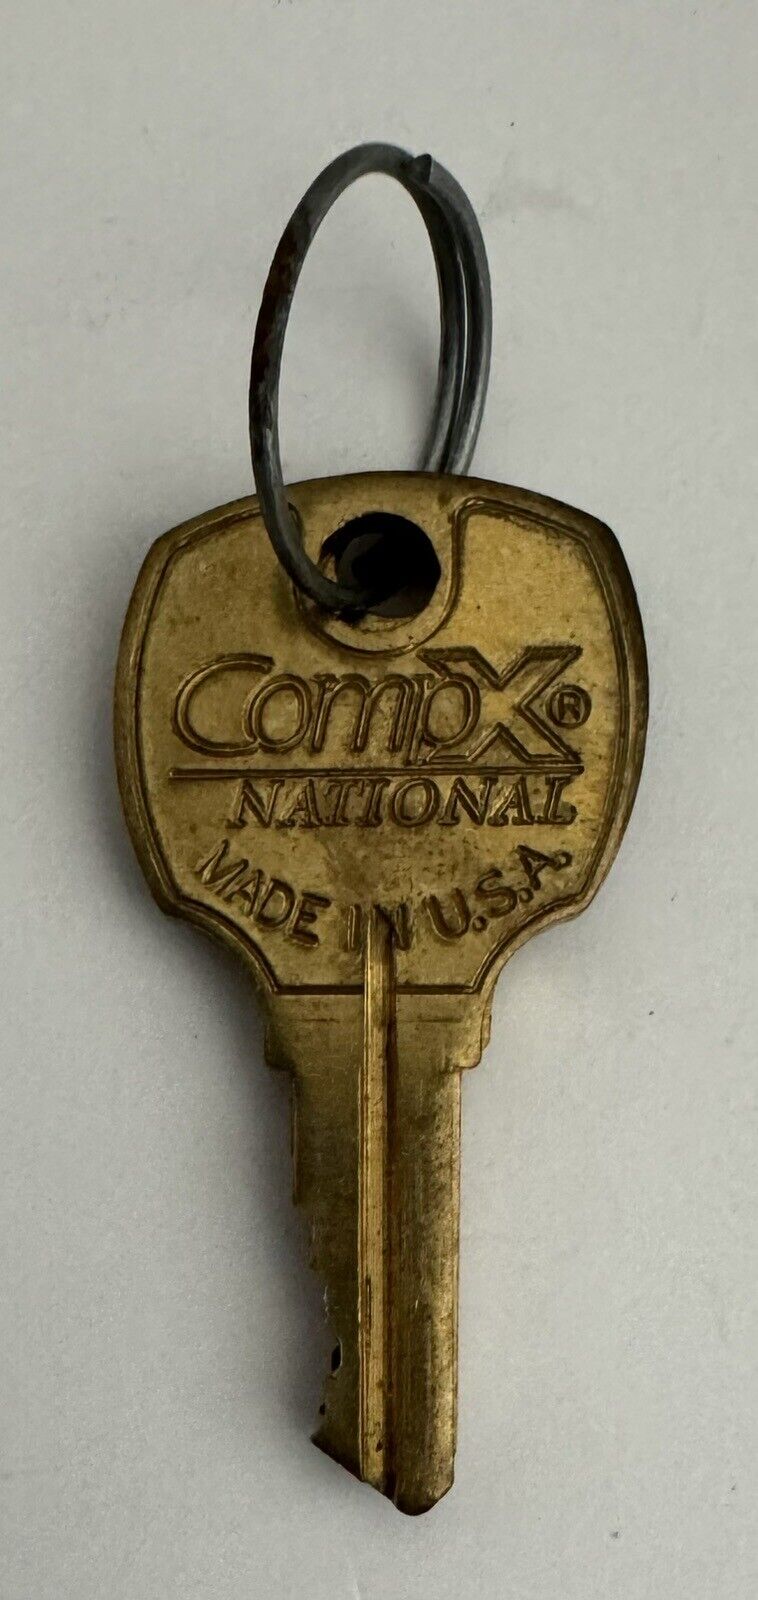 Lot Of 2 Comp X National  Key C415A Made In USA